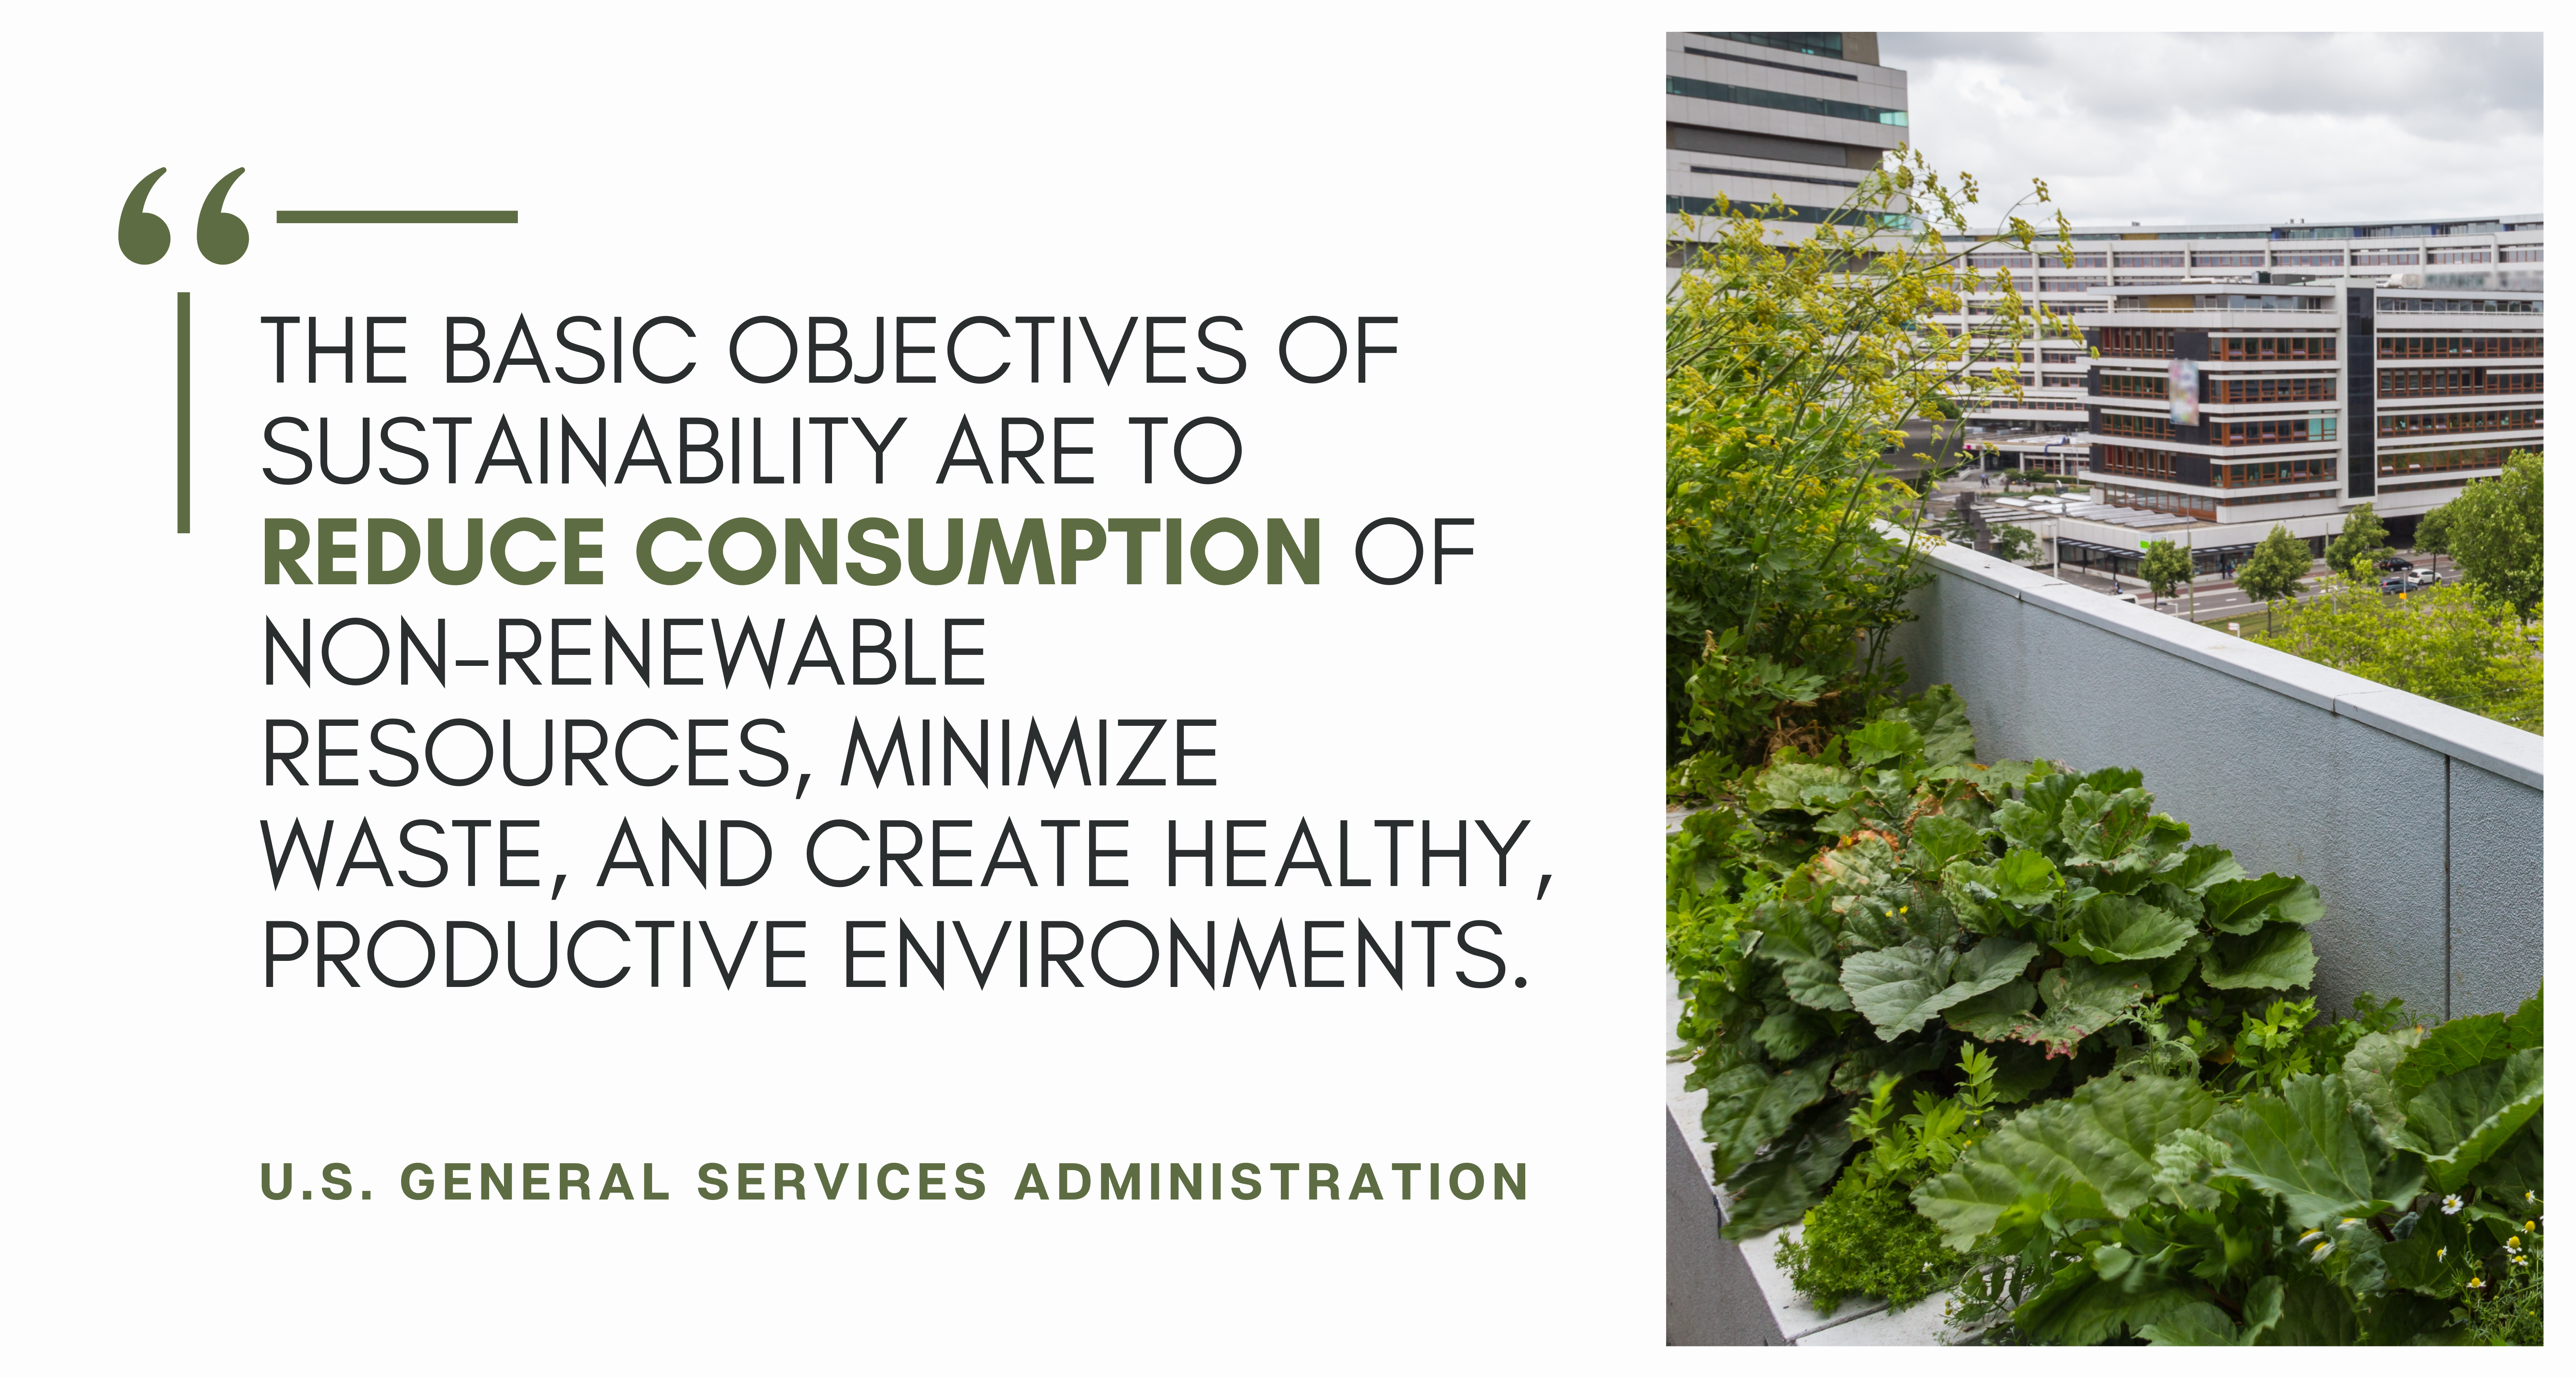 BENEFITS OF SUSTAINABLE ARCHITECTURE AND SUSTAINABLE DEVELOPMENT